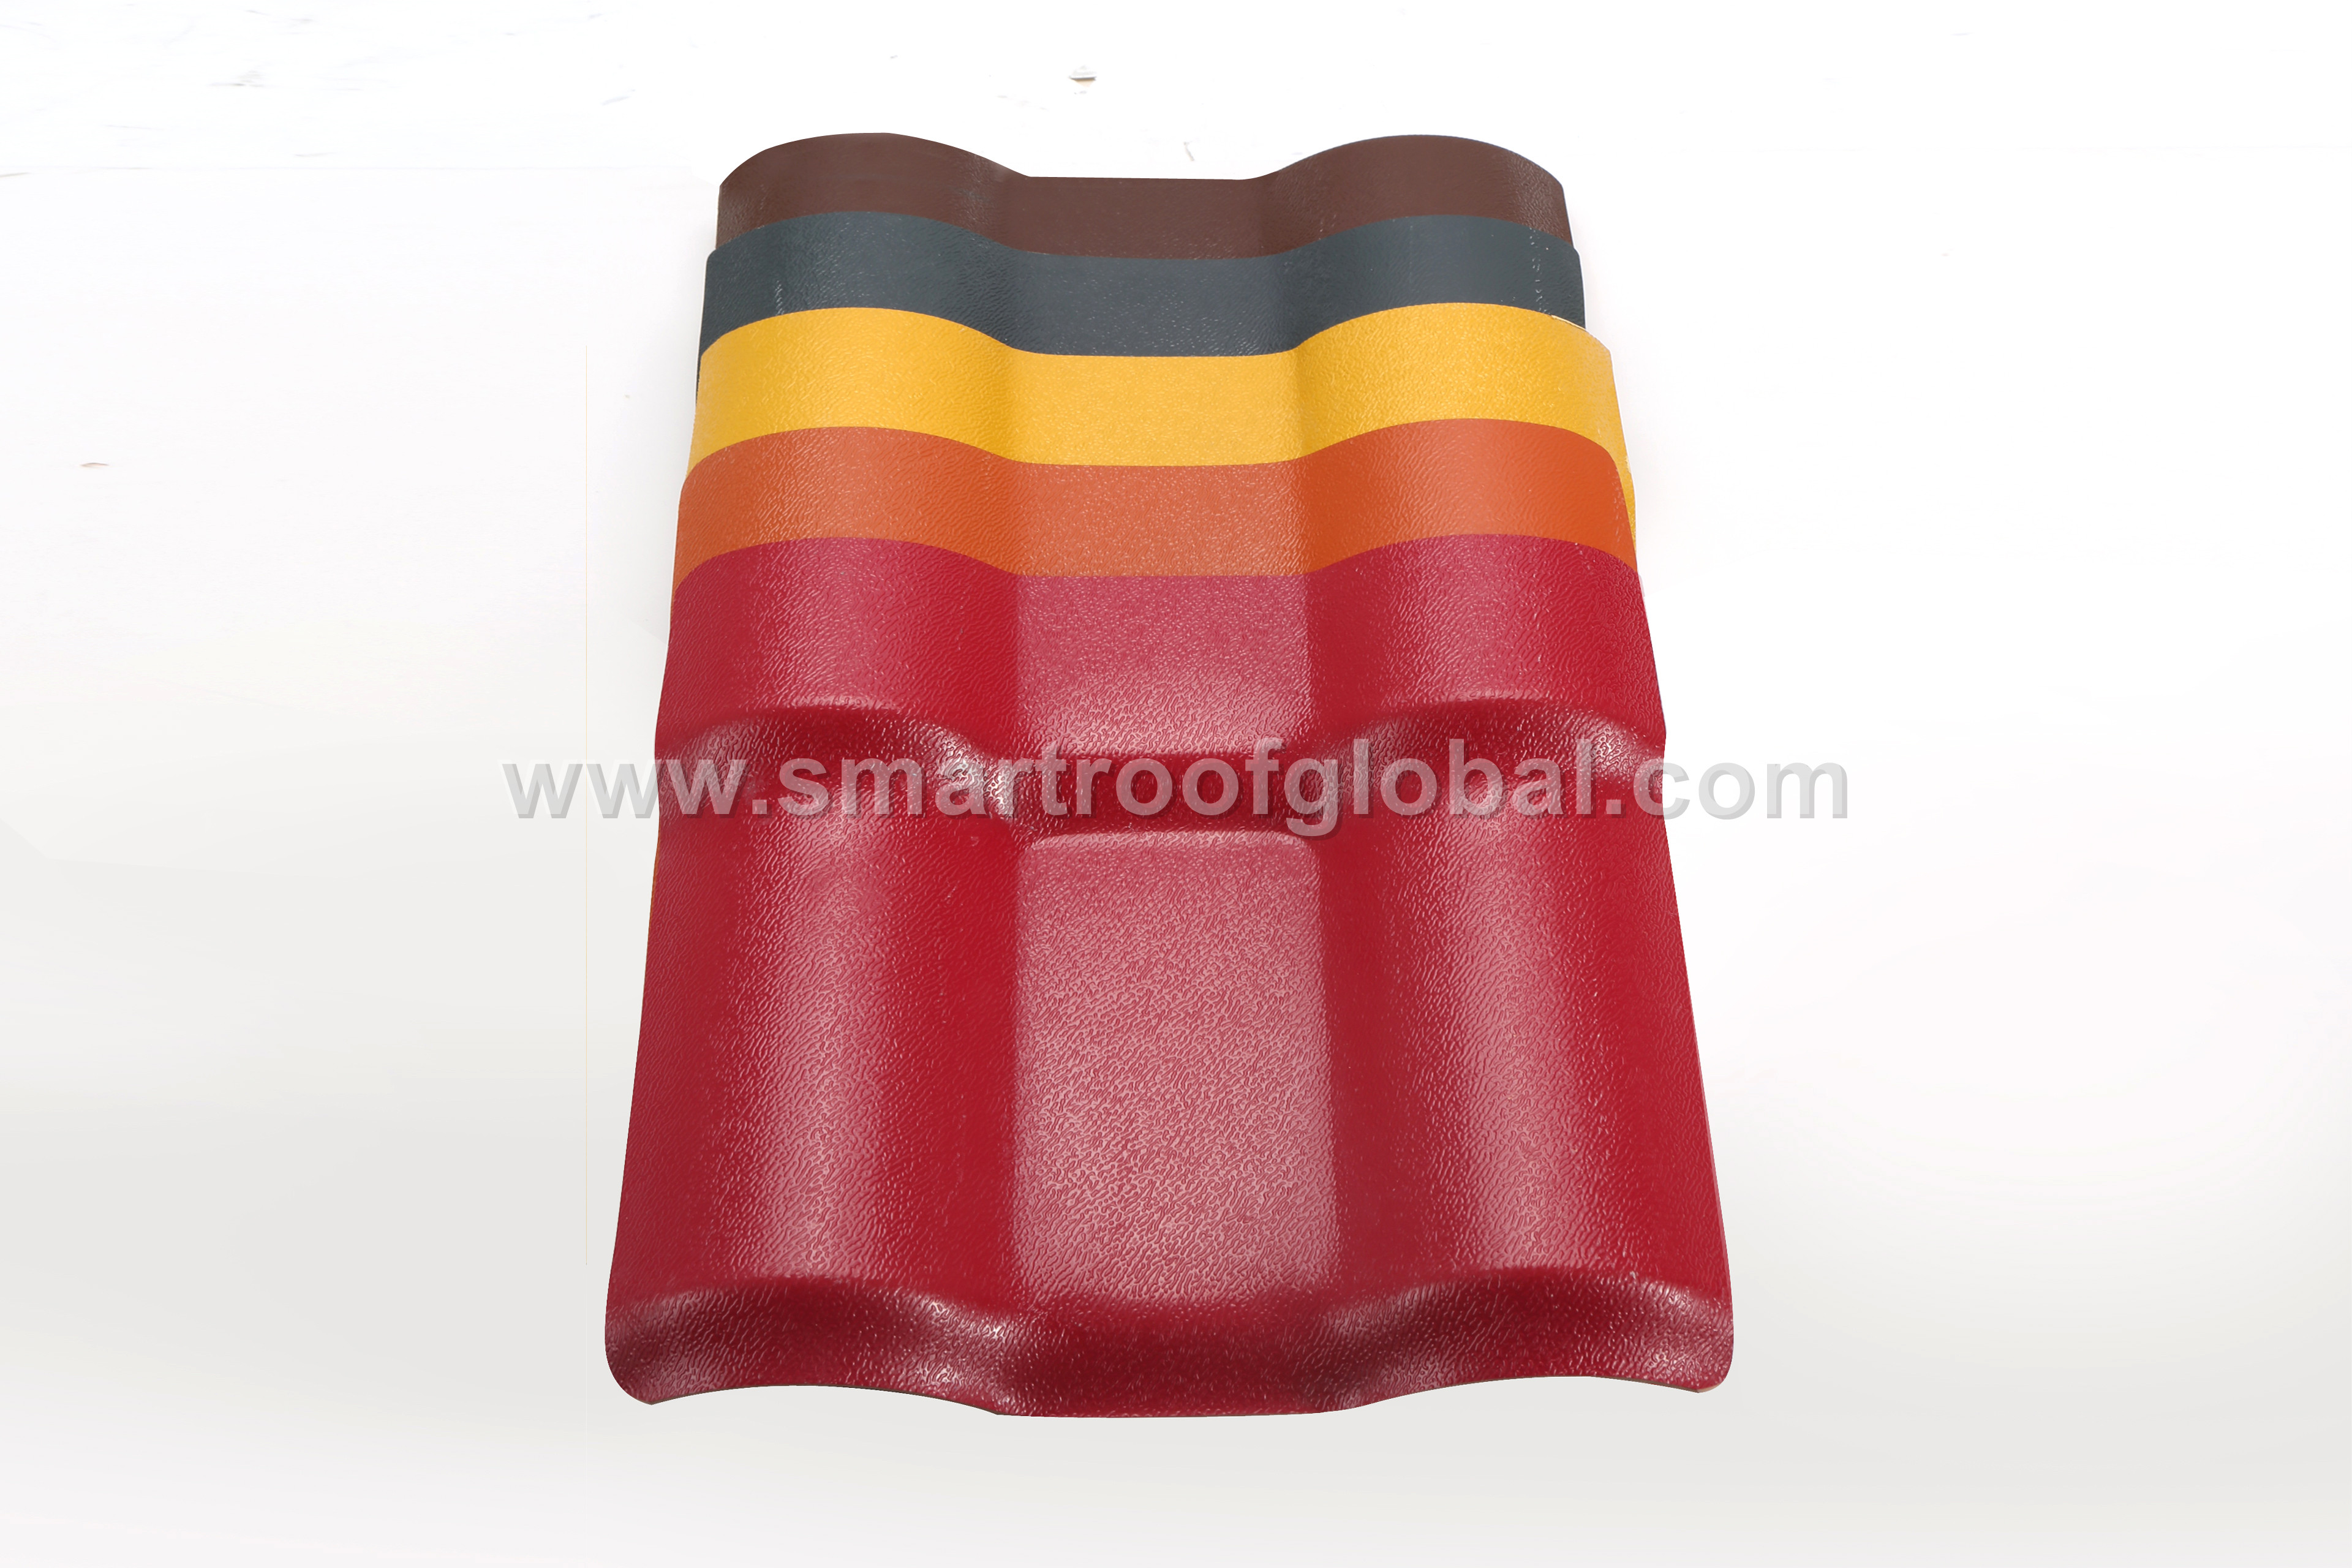 Wholesale Price China Pvc Hollow Roof - Resin Roofing Sheet – Smartroof